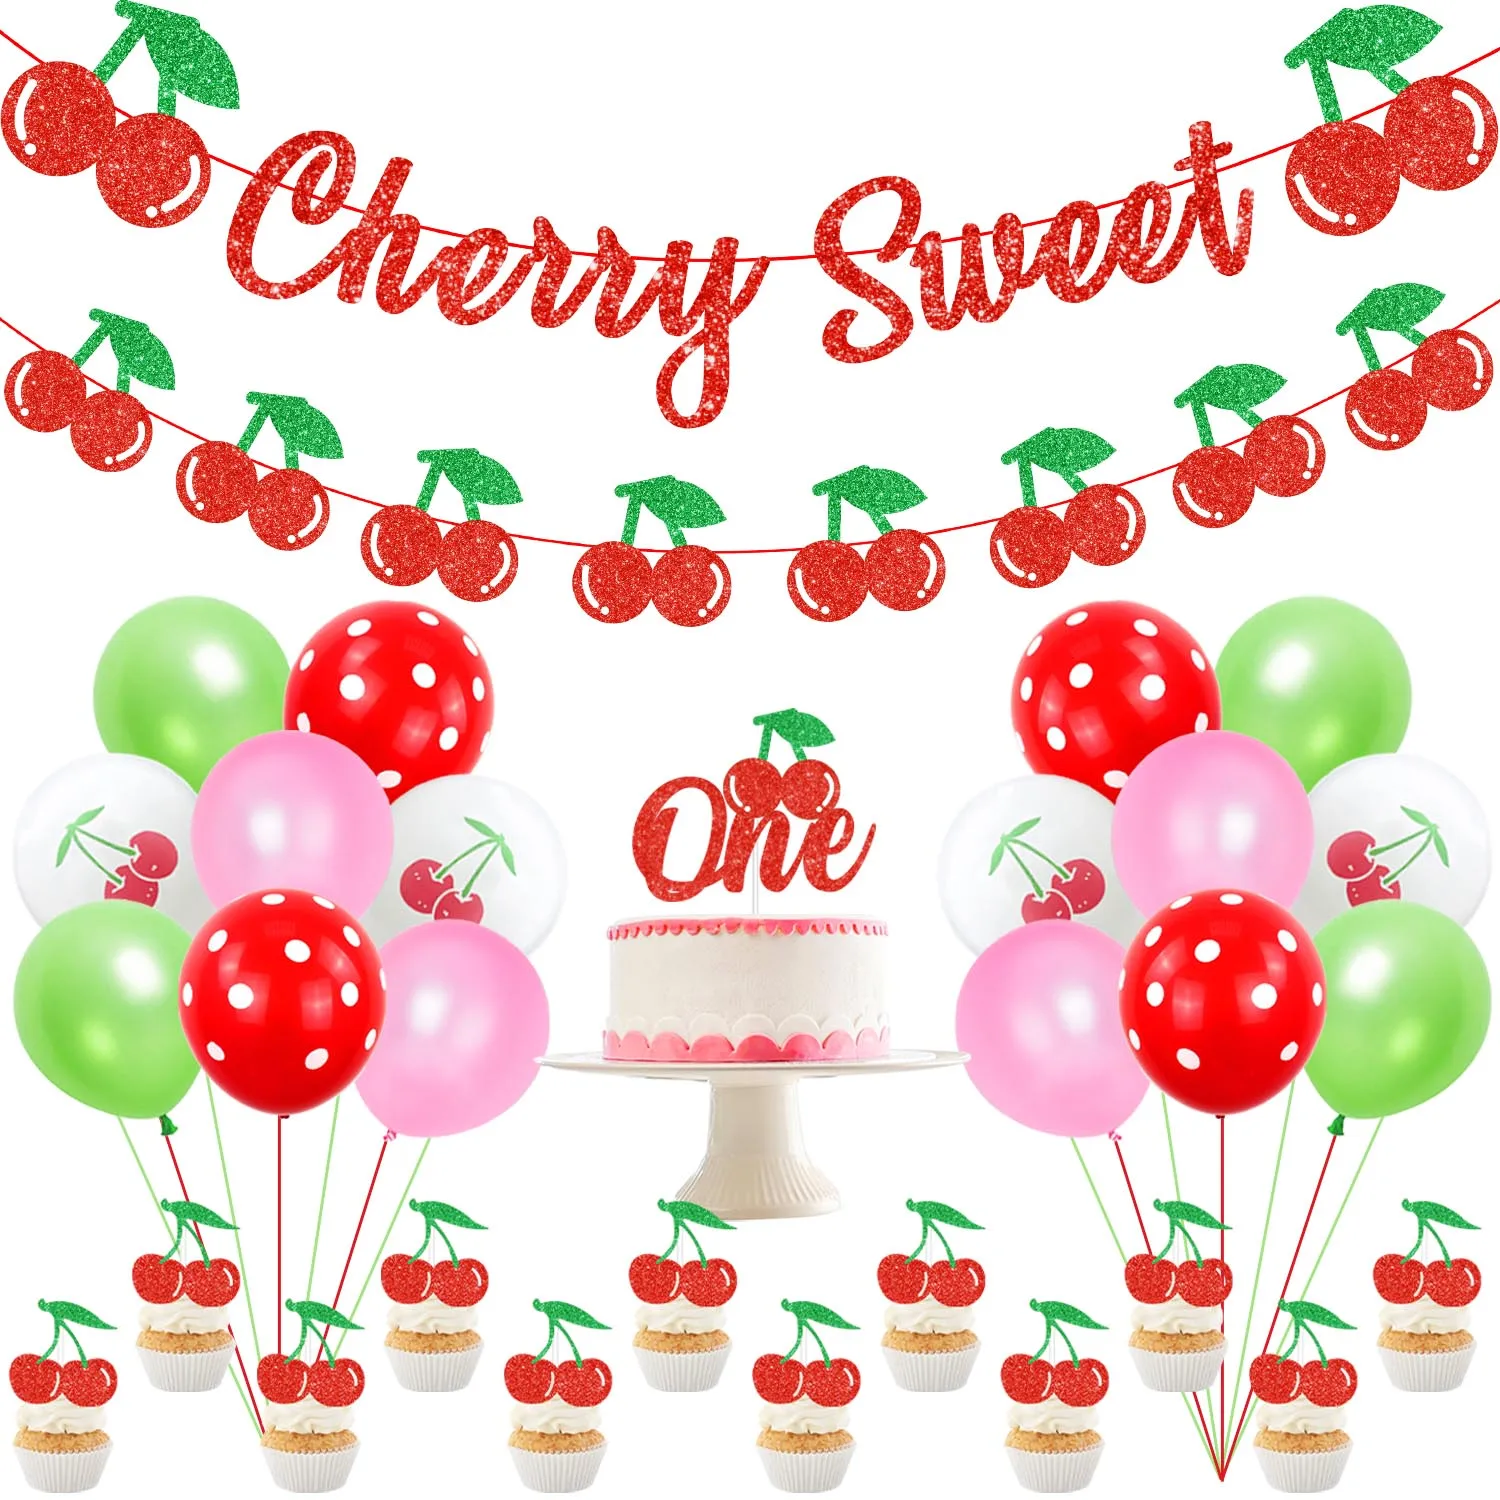 

Cherry 1st Birthday Decoration for Girls Cherry Sweet Banner Garland One Cake Topper Balloon for Kids Fruit First Birthday Party